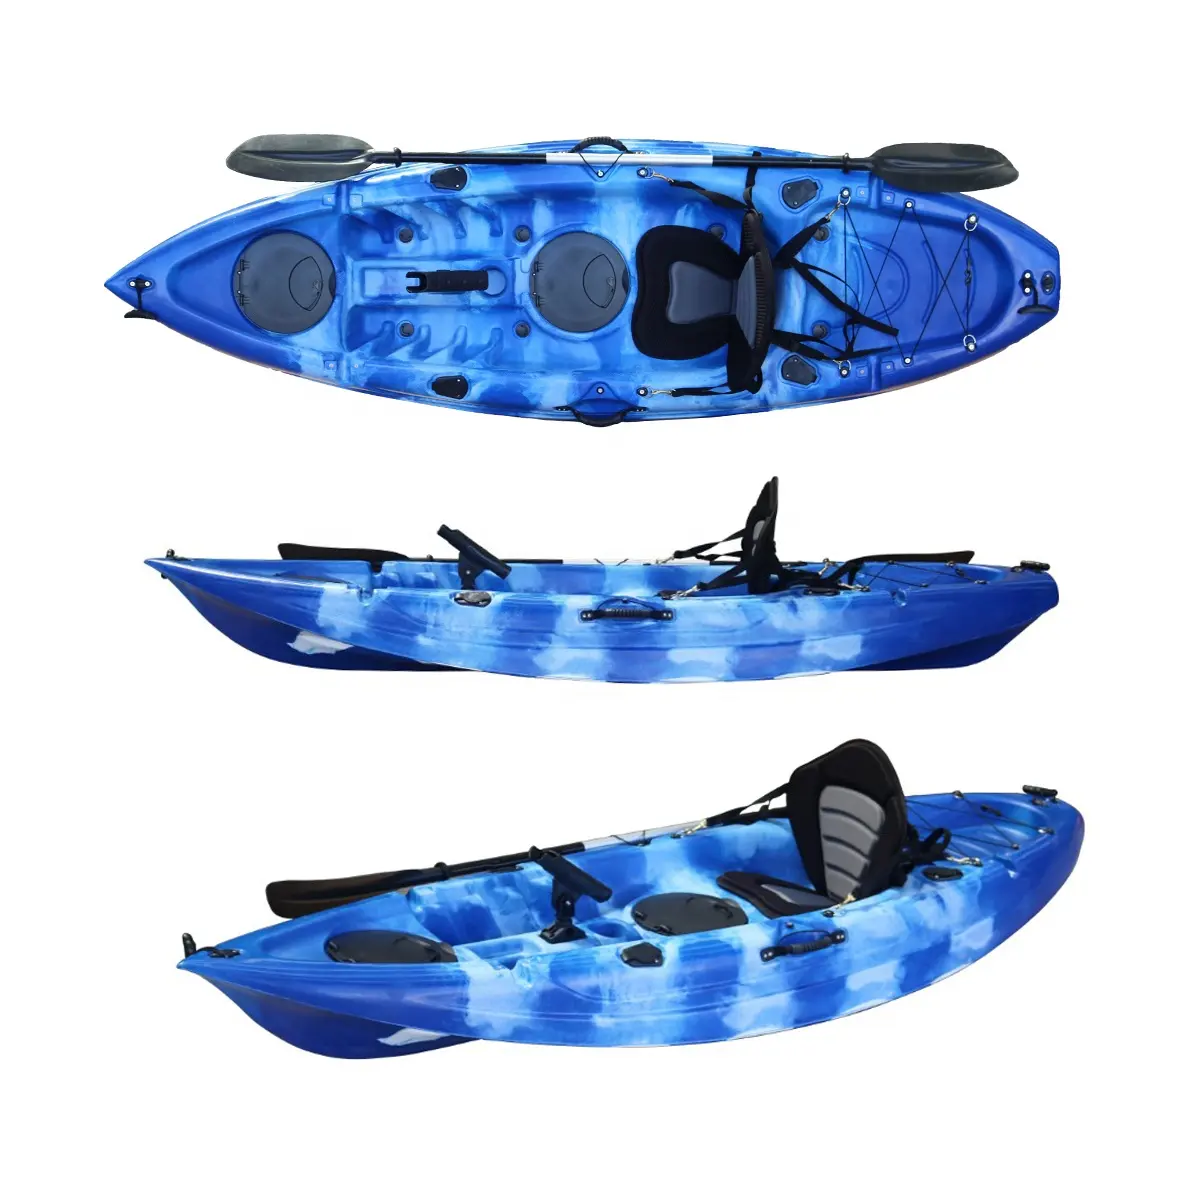 Hot wind No Inflatable Single Person Sit On Top Thermoforming Fishing Kayak Wholesale With Deluxe Seat